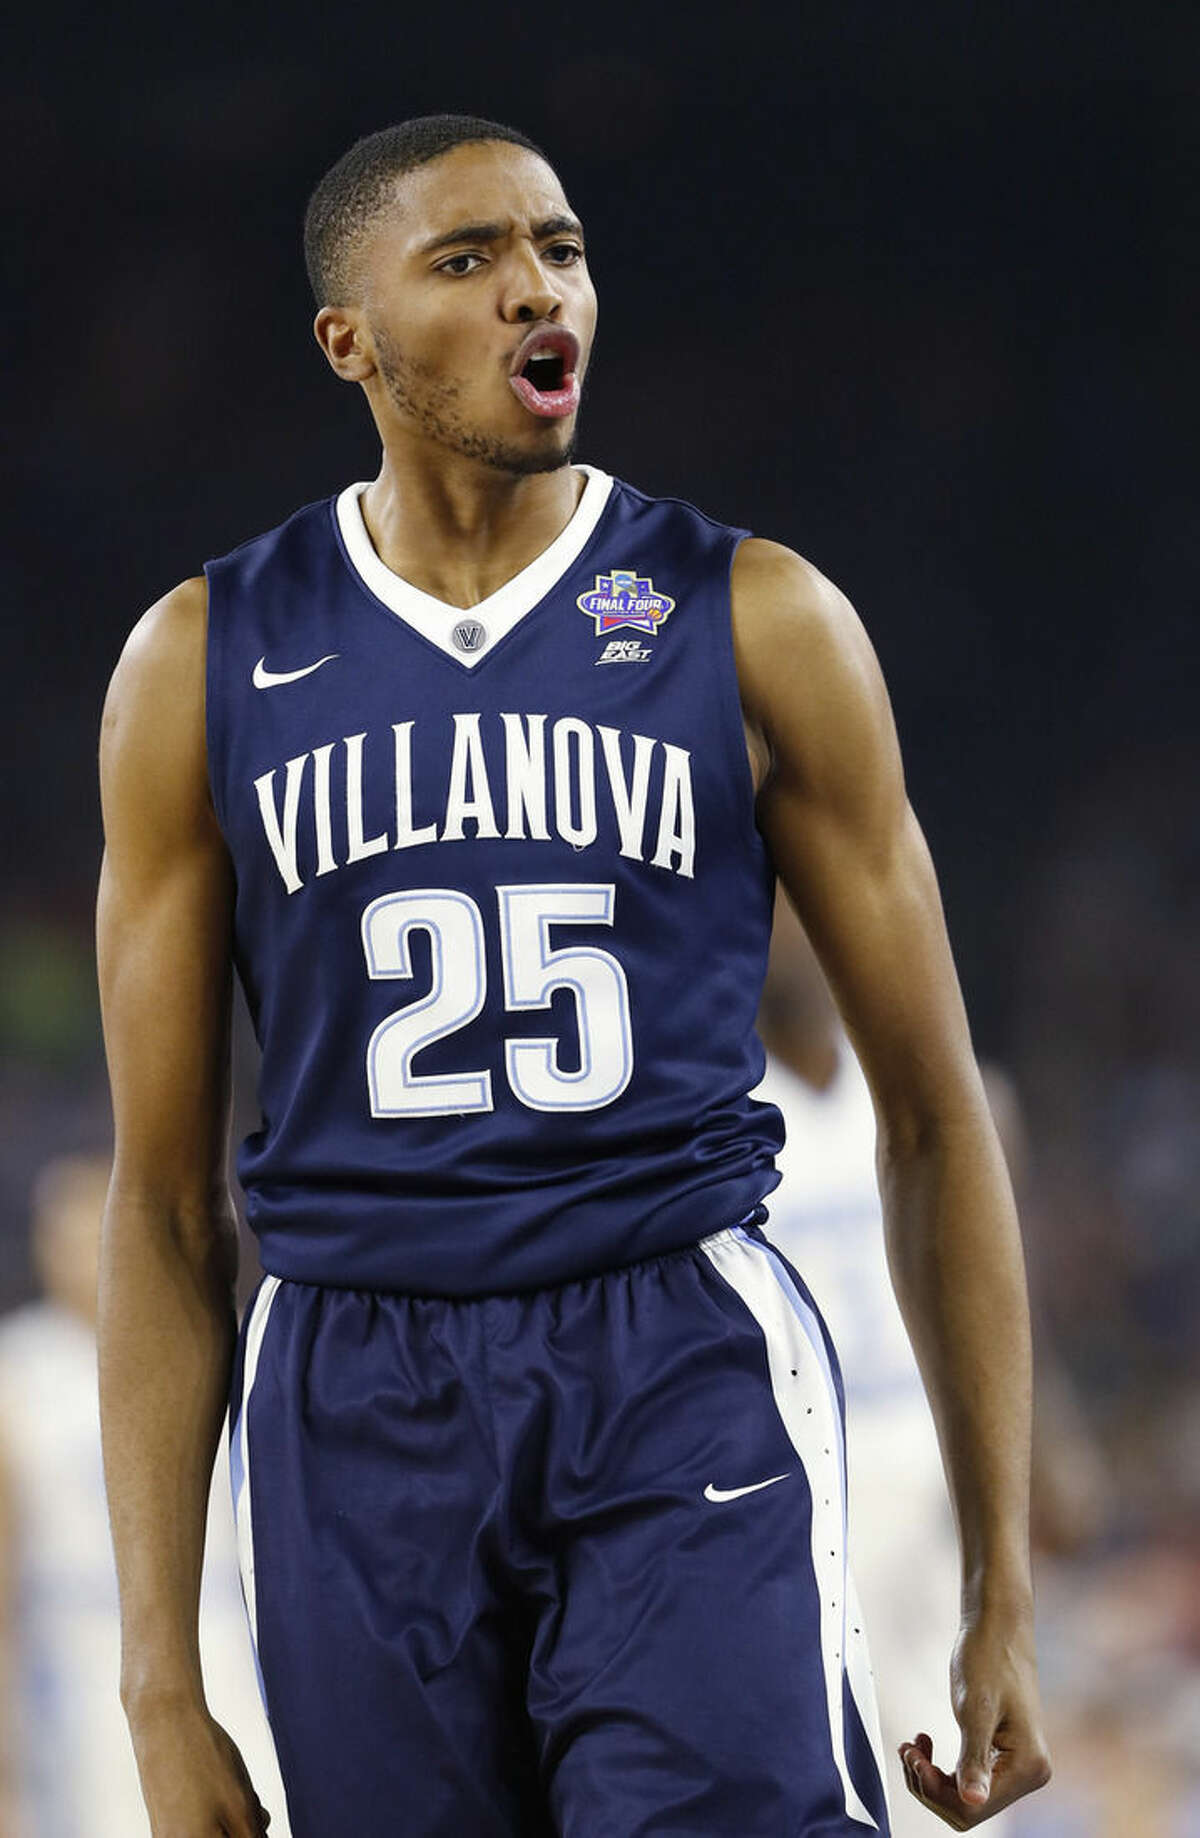 Villanova guard Mikal Bridges (25) reacts to play against North Carolina during the second half of the NCAA Final Four tournament college basketball championship game Monday, April 4, 2016, in Houston. (AP Photo/Eric Gay)